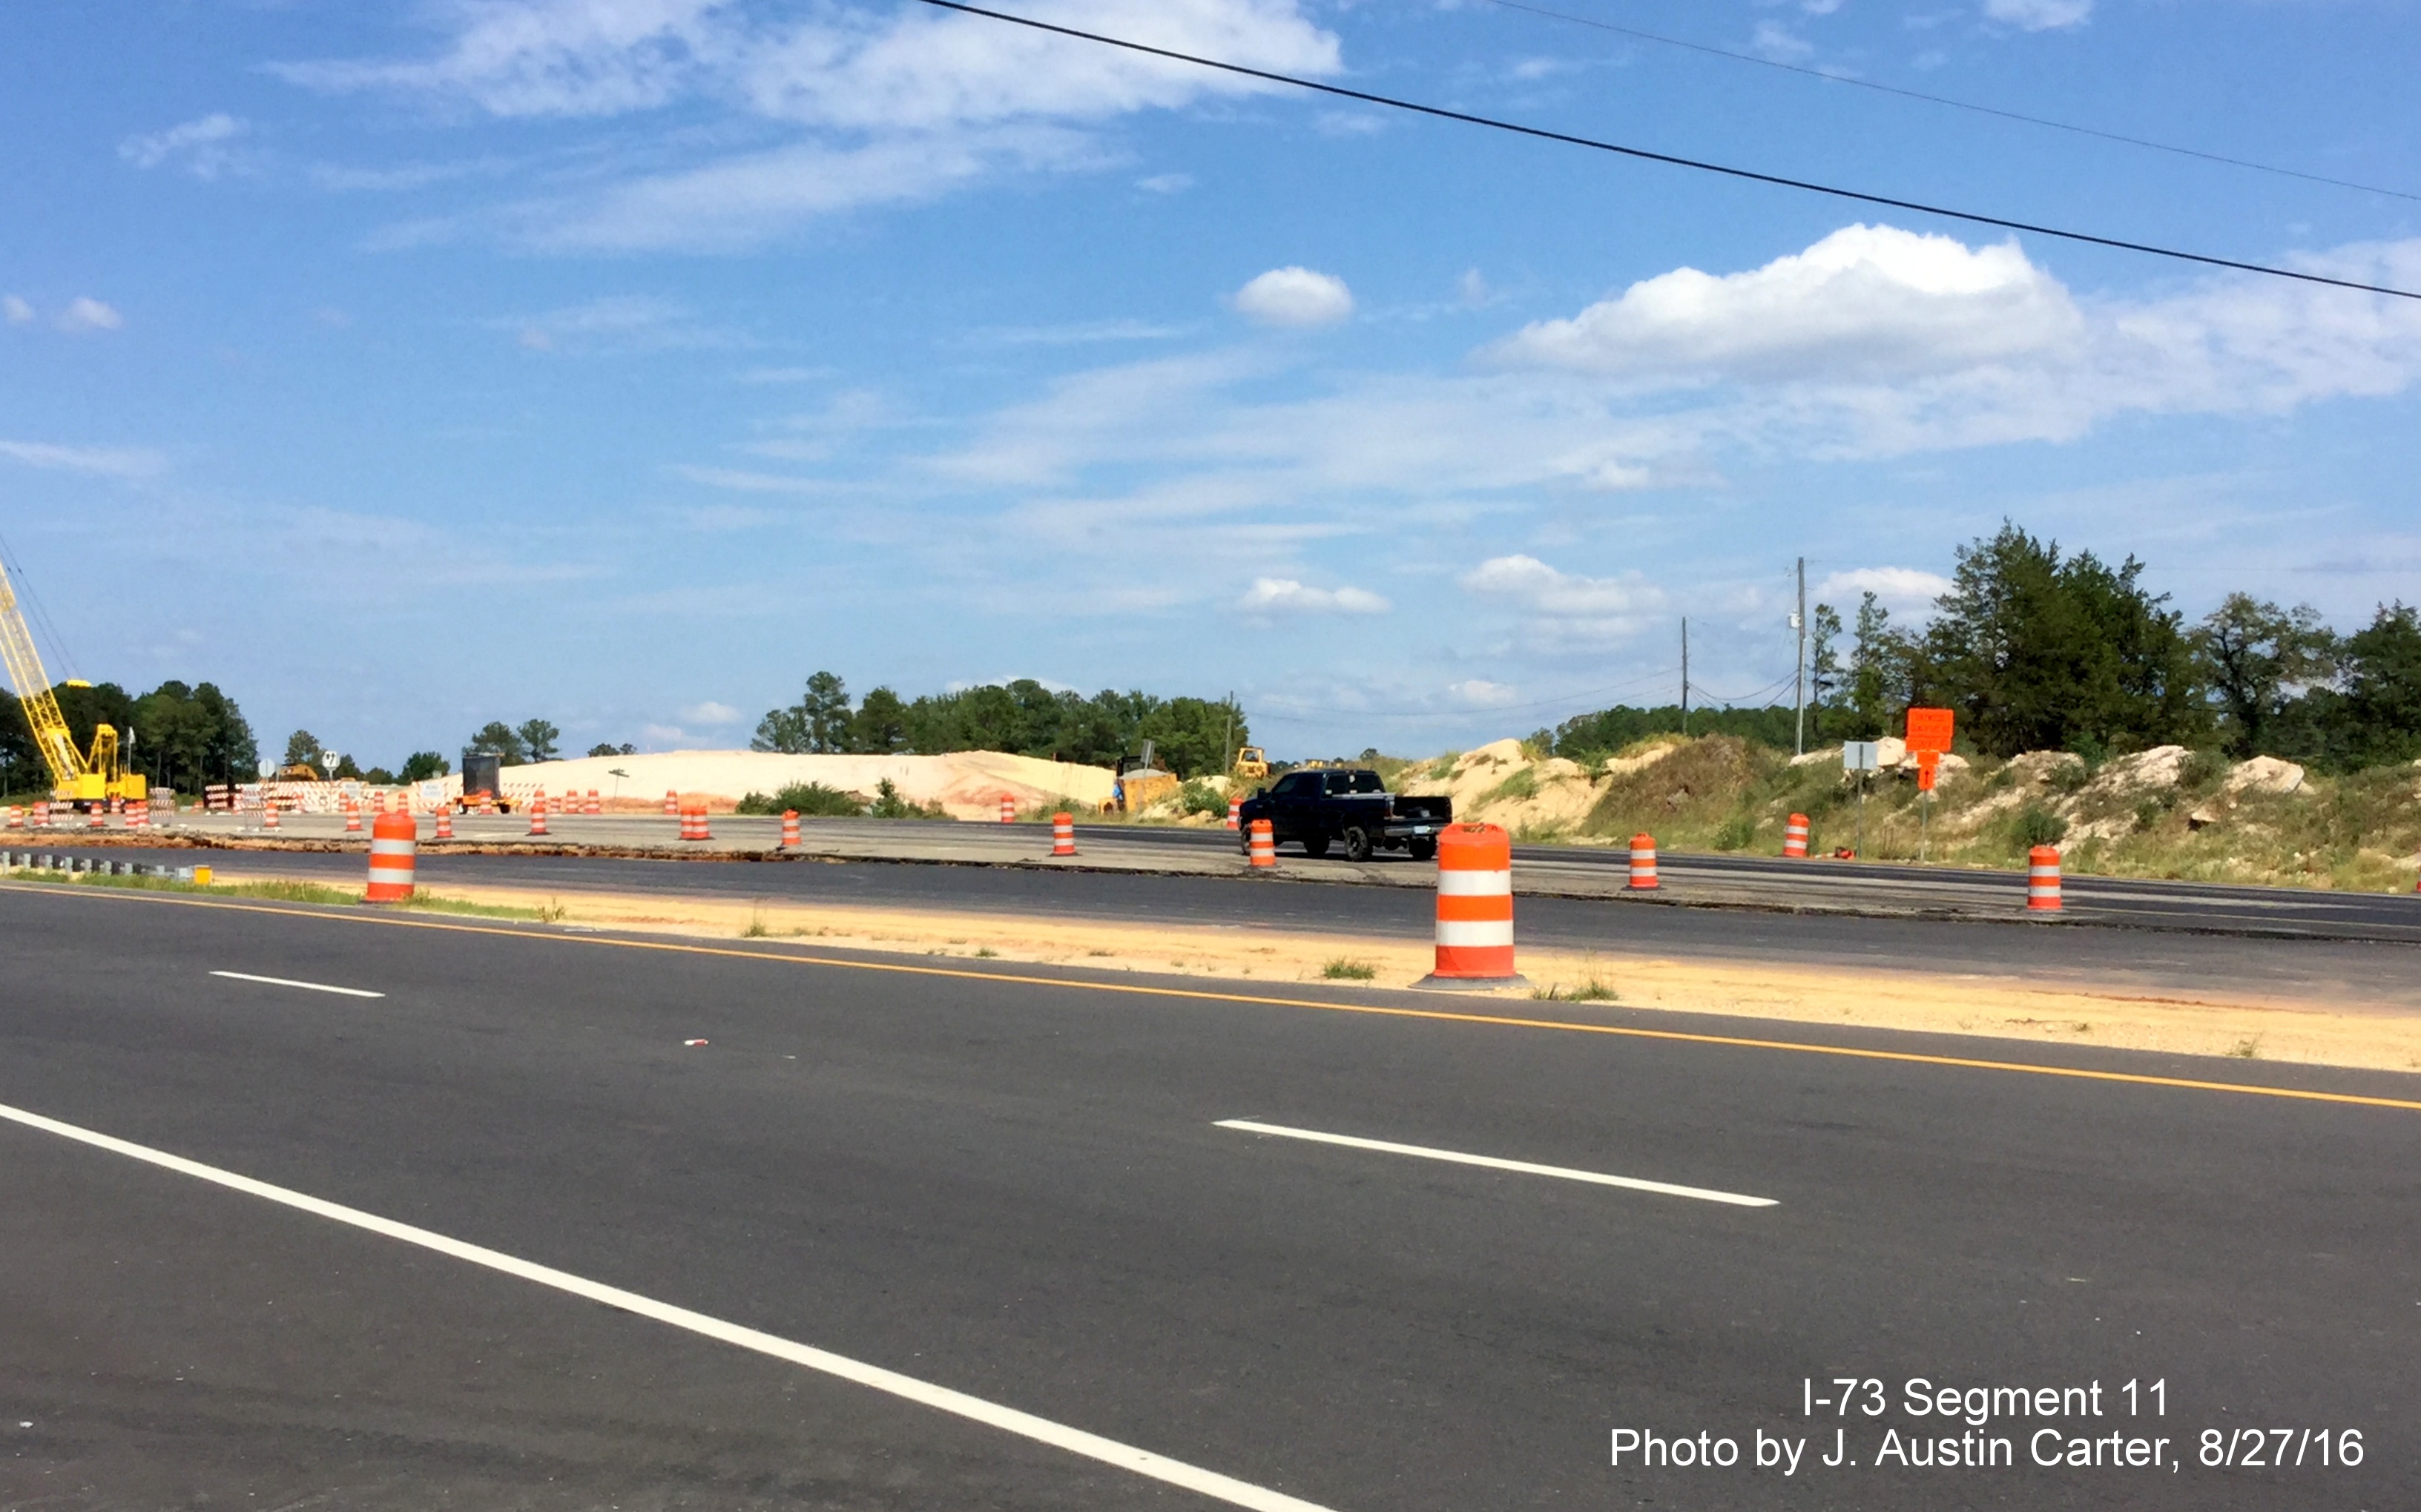 Image taken of construction along US 220 in vicinity of future Haywood Cemetery Rd interchange, by J. Austin Carter